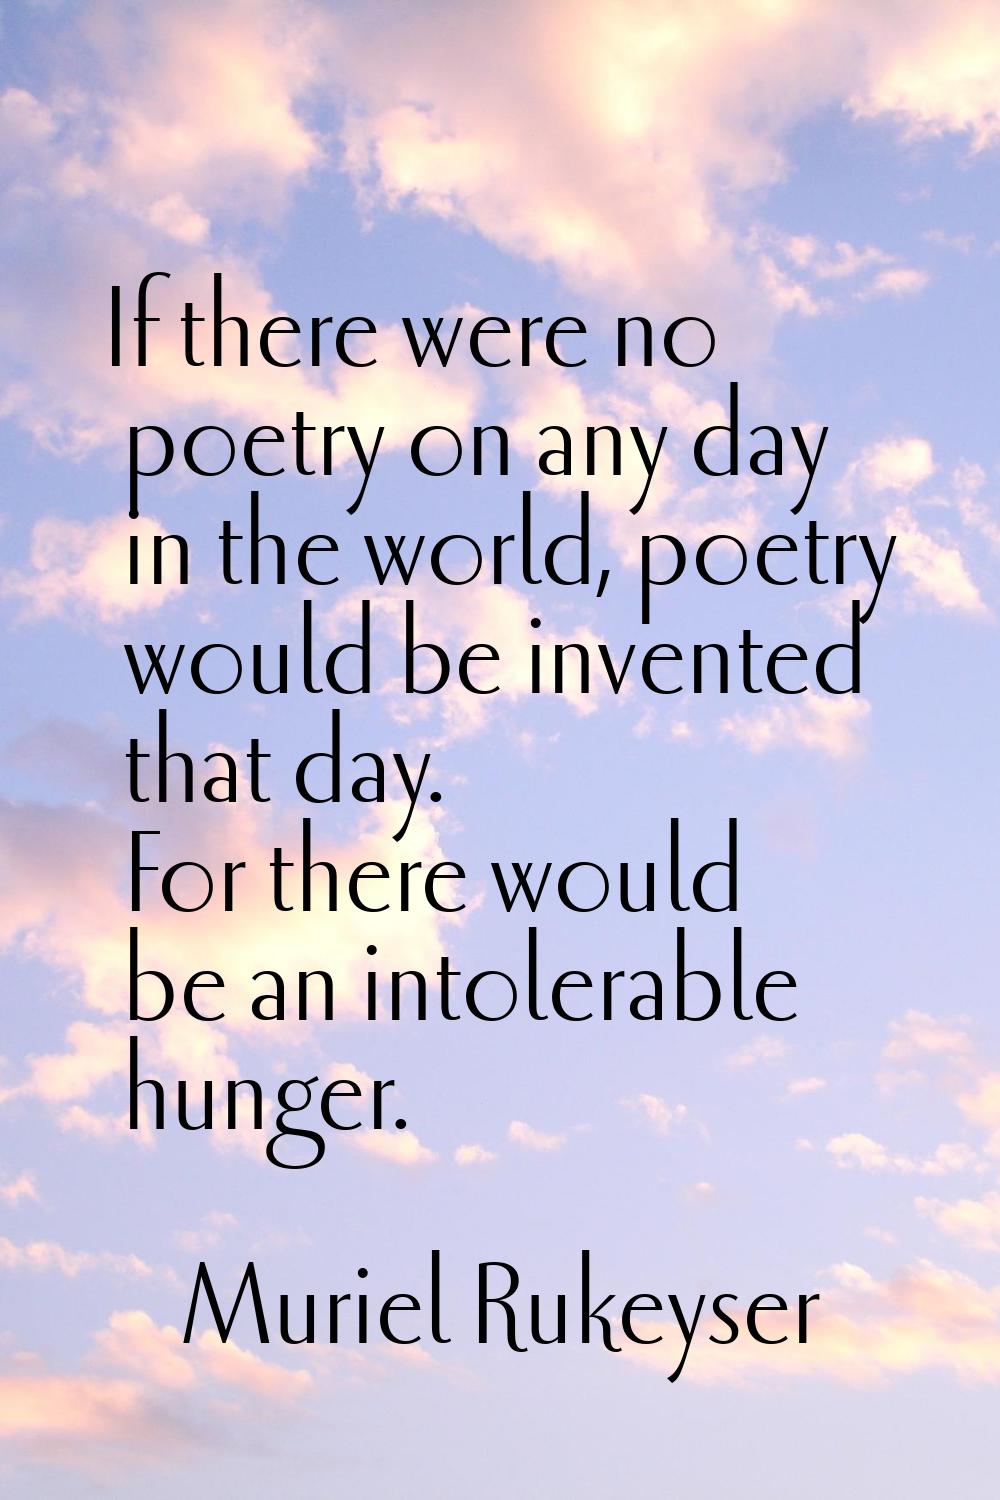 If there were no poetry on any day in the world, poetry would be invented that day. For there would